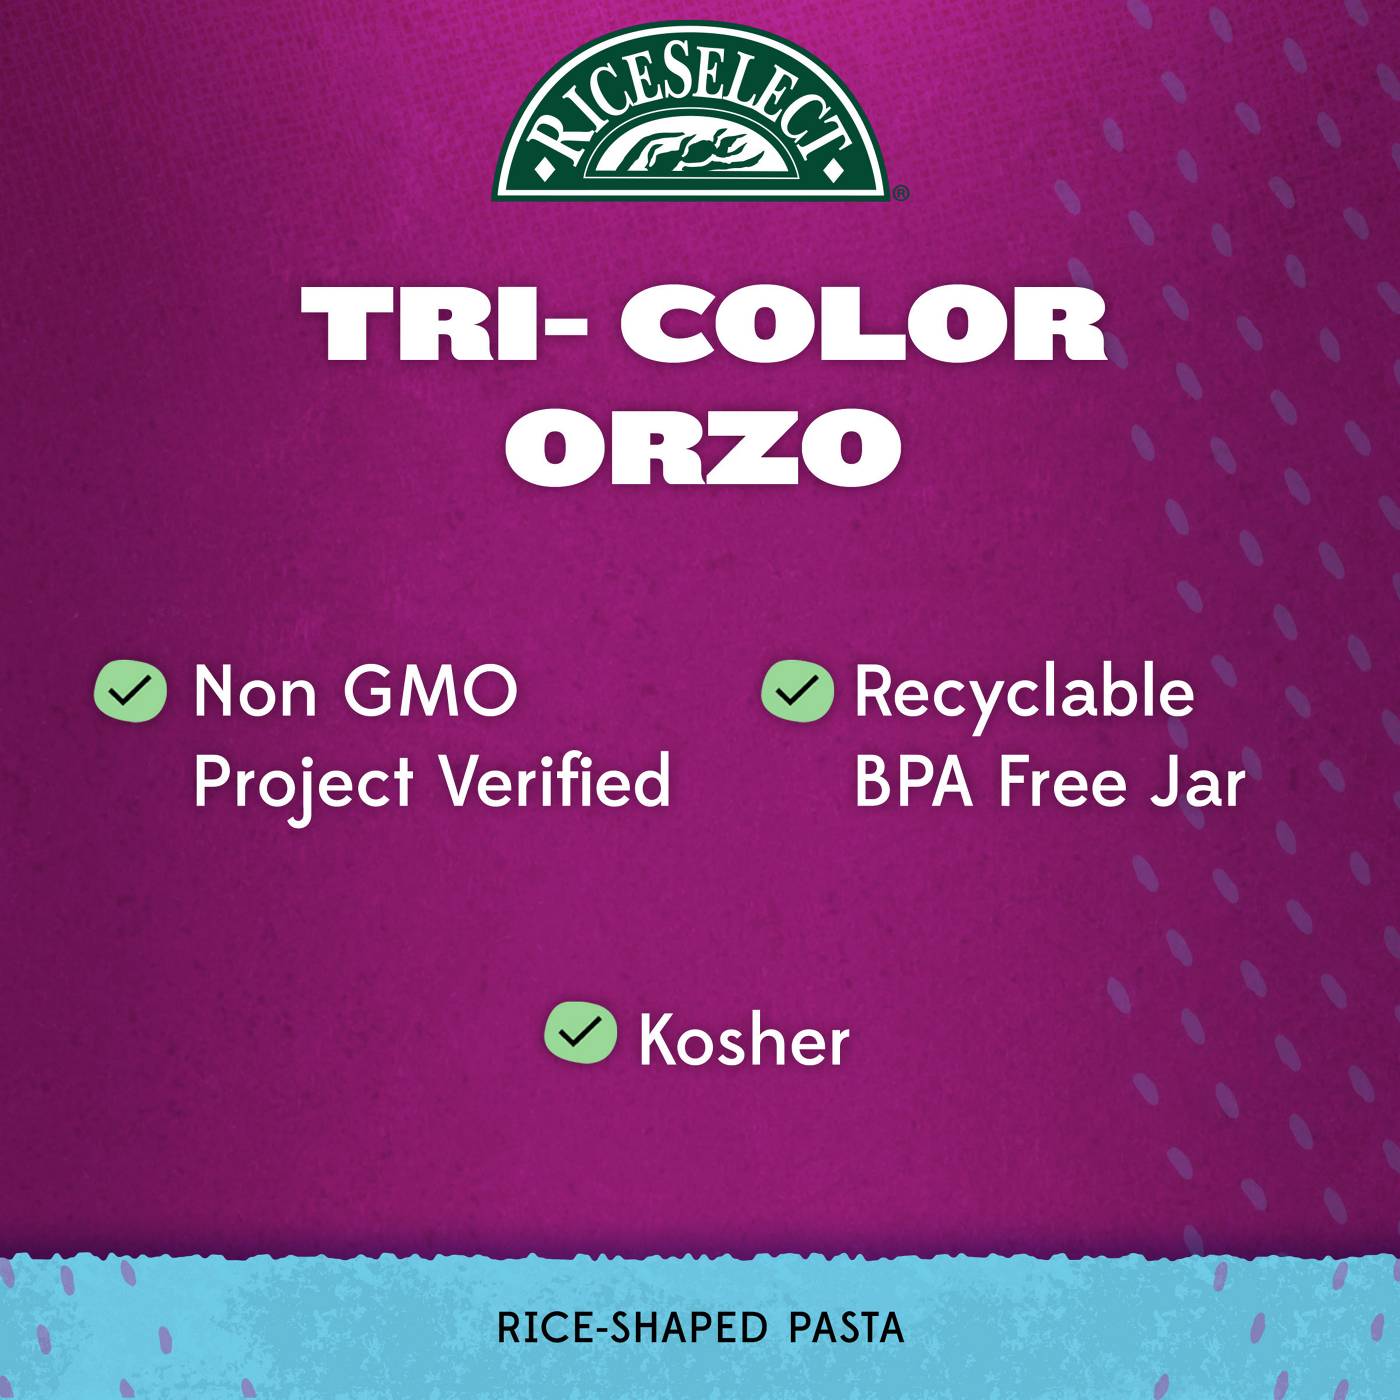 RiceSelect Tri-Color Orzo; image 5 of 6